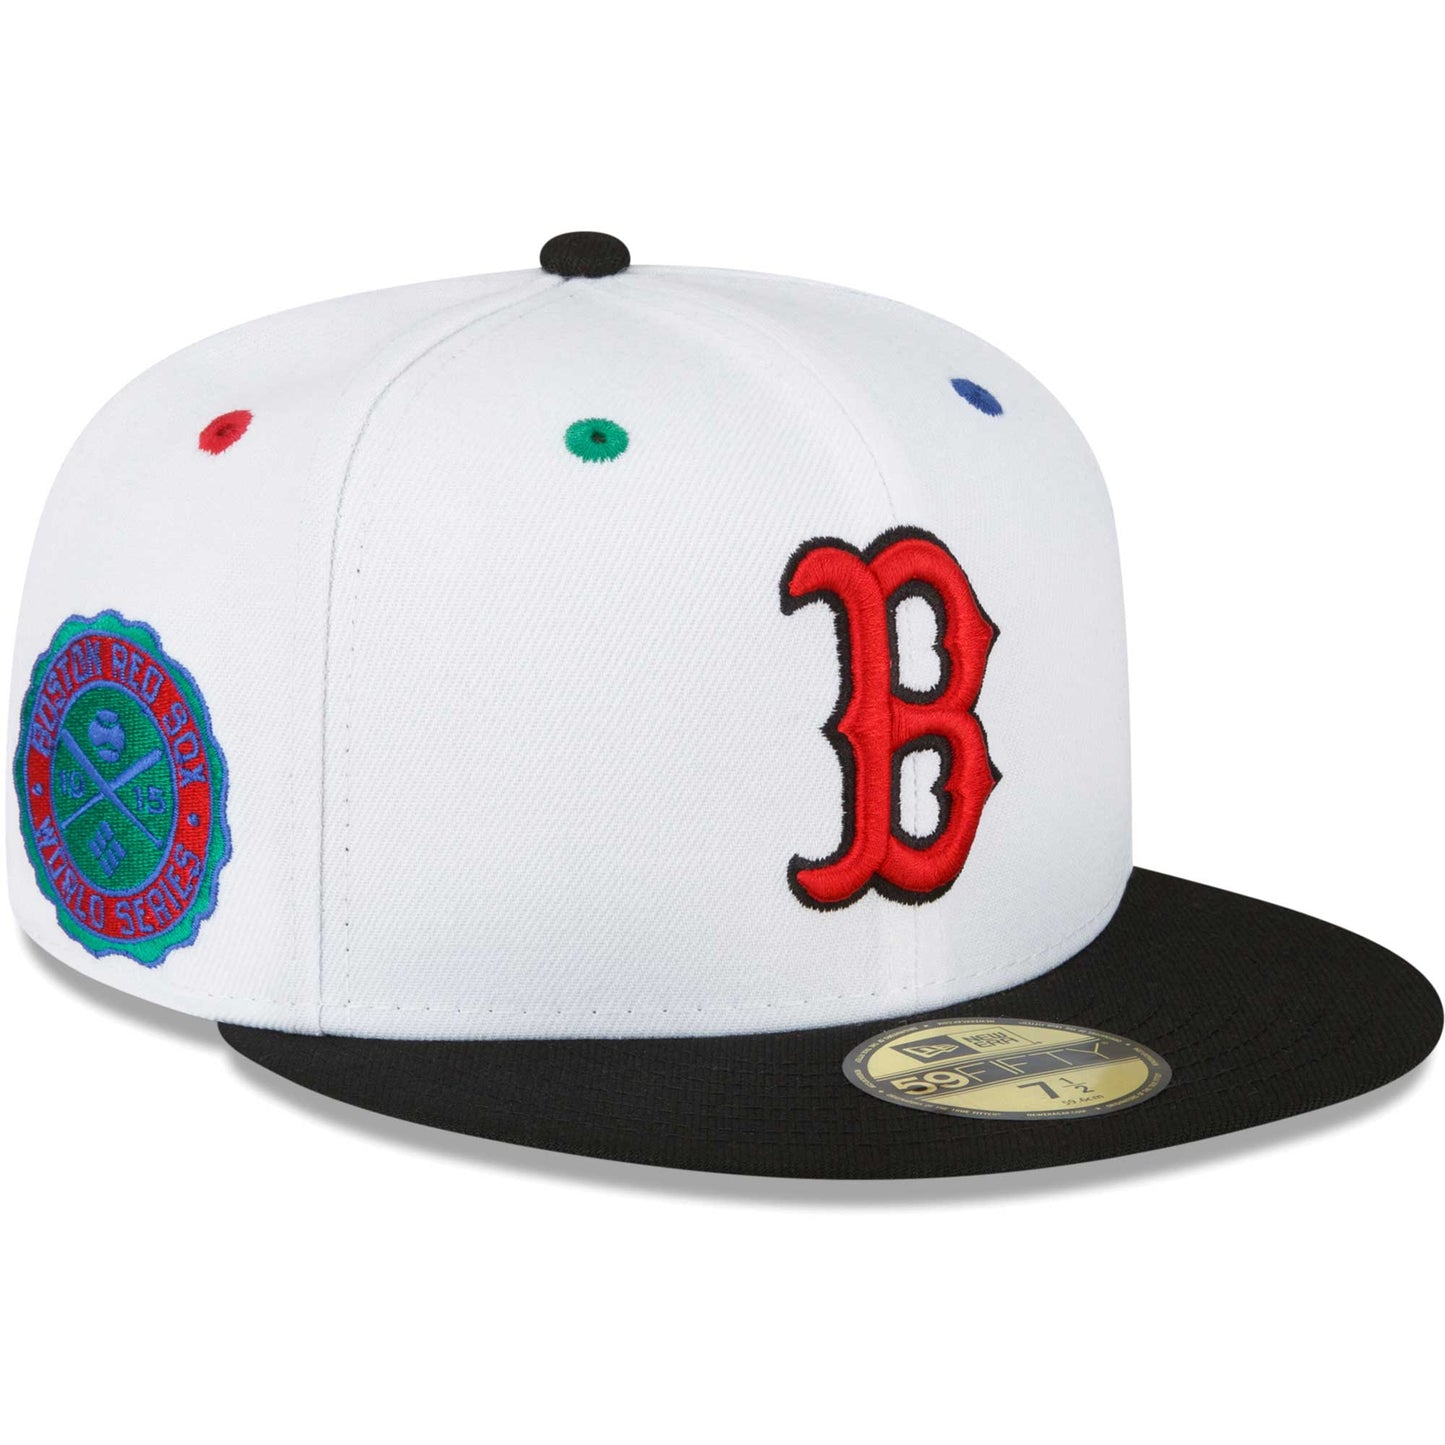 Boston Red Sox New Era 1915 World Series Primary Eye 59FIFTY Fitted Hat - White/Black